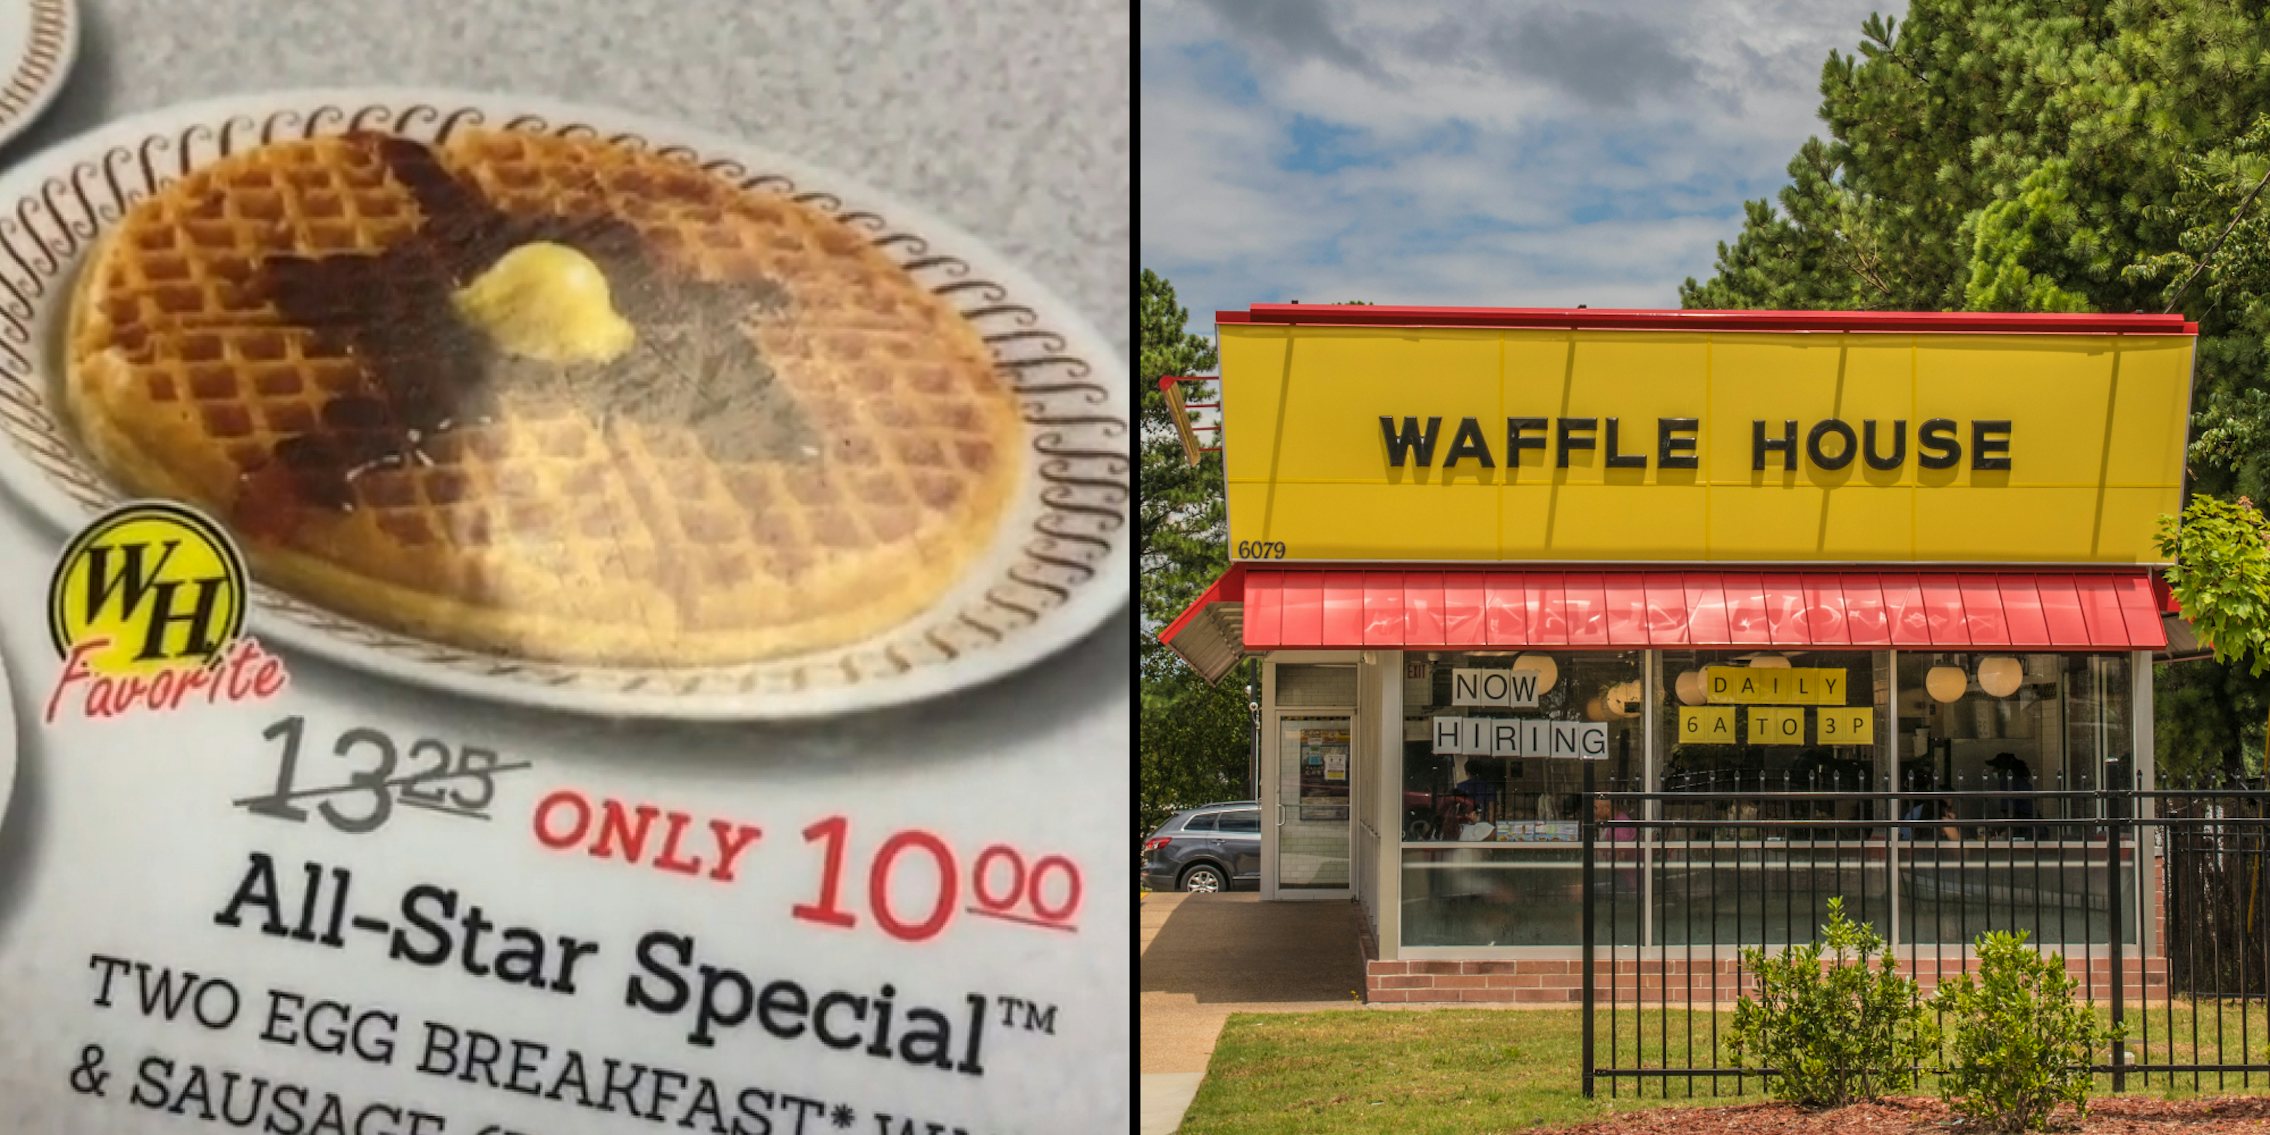 Waffle House menu 'All-Star Special''$13.95 (crossed out) only $10.00' with photo of waffles (l) Waffle House building with blue sky and trees (r)